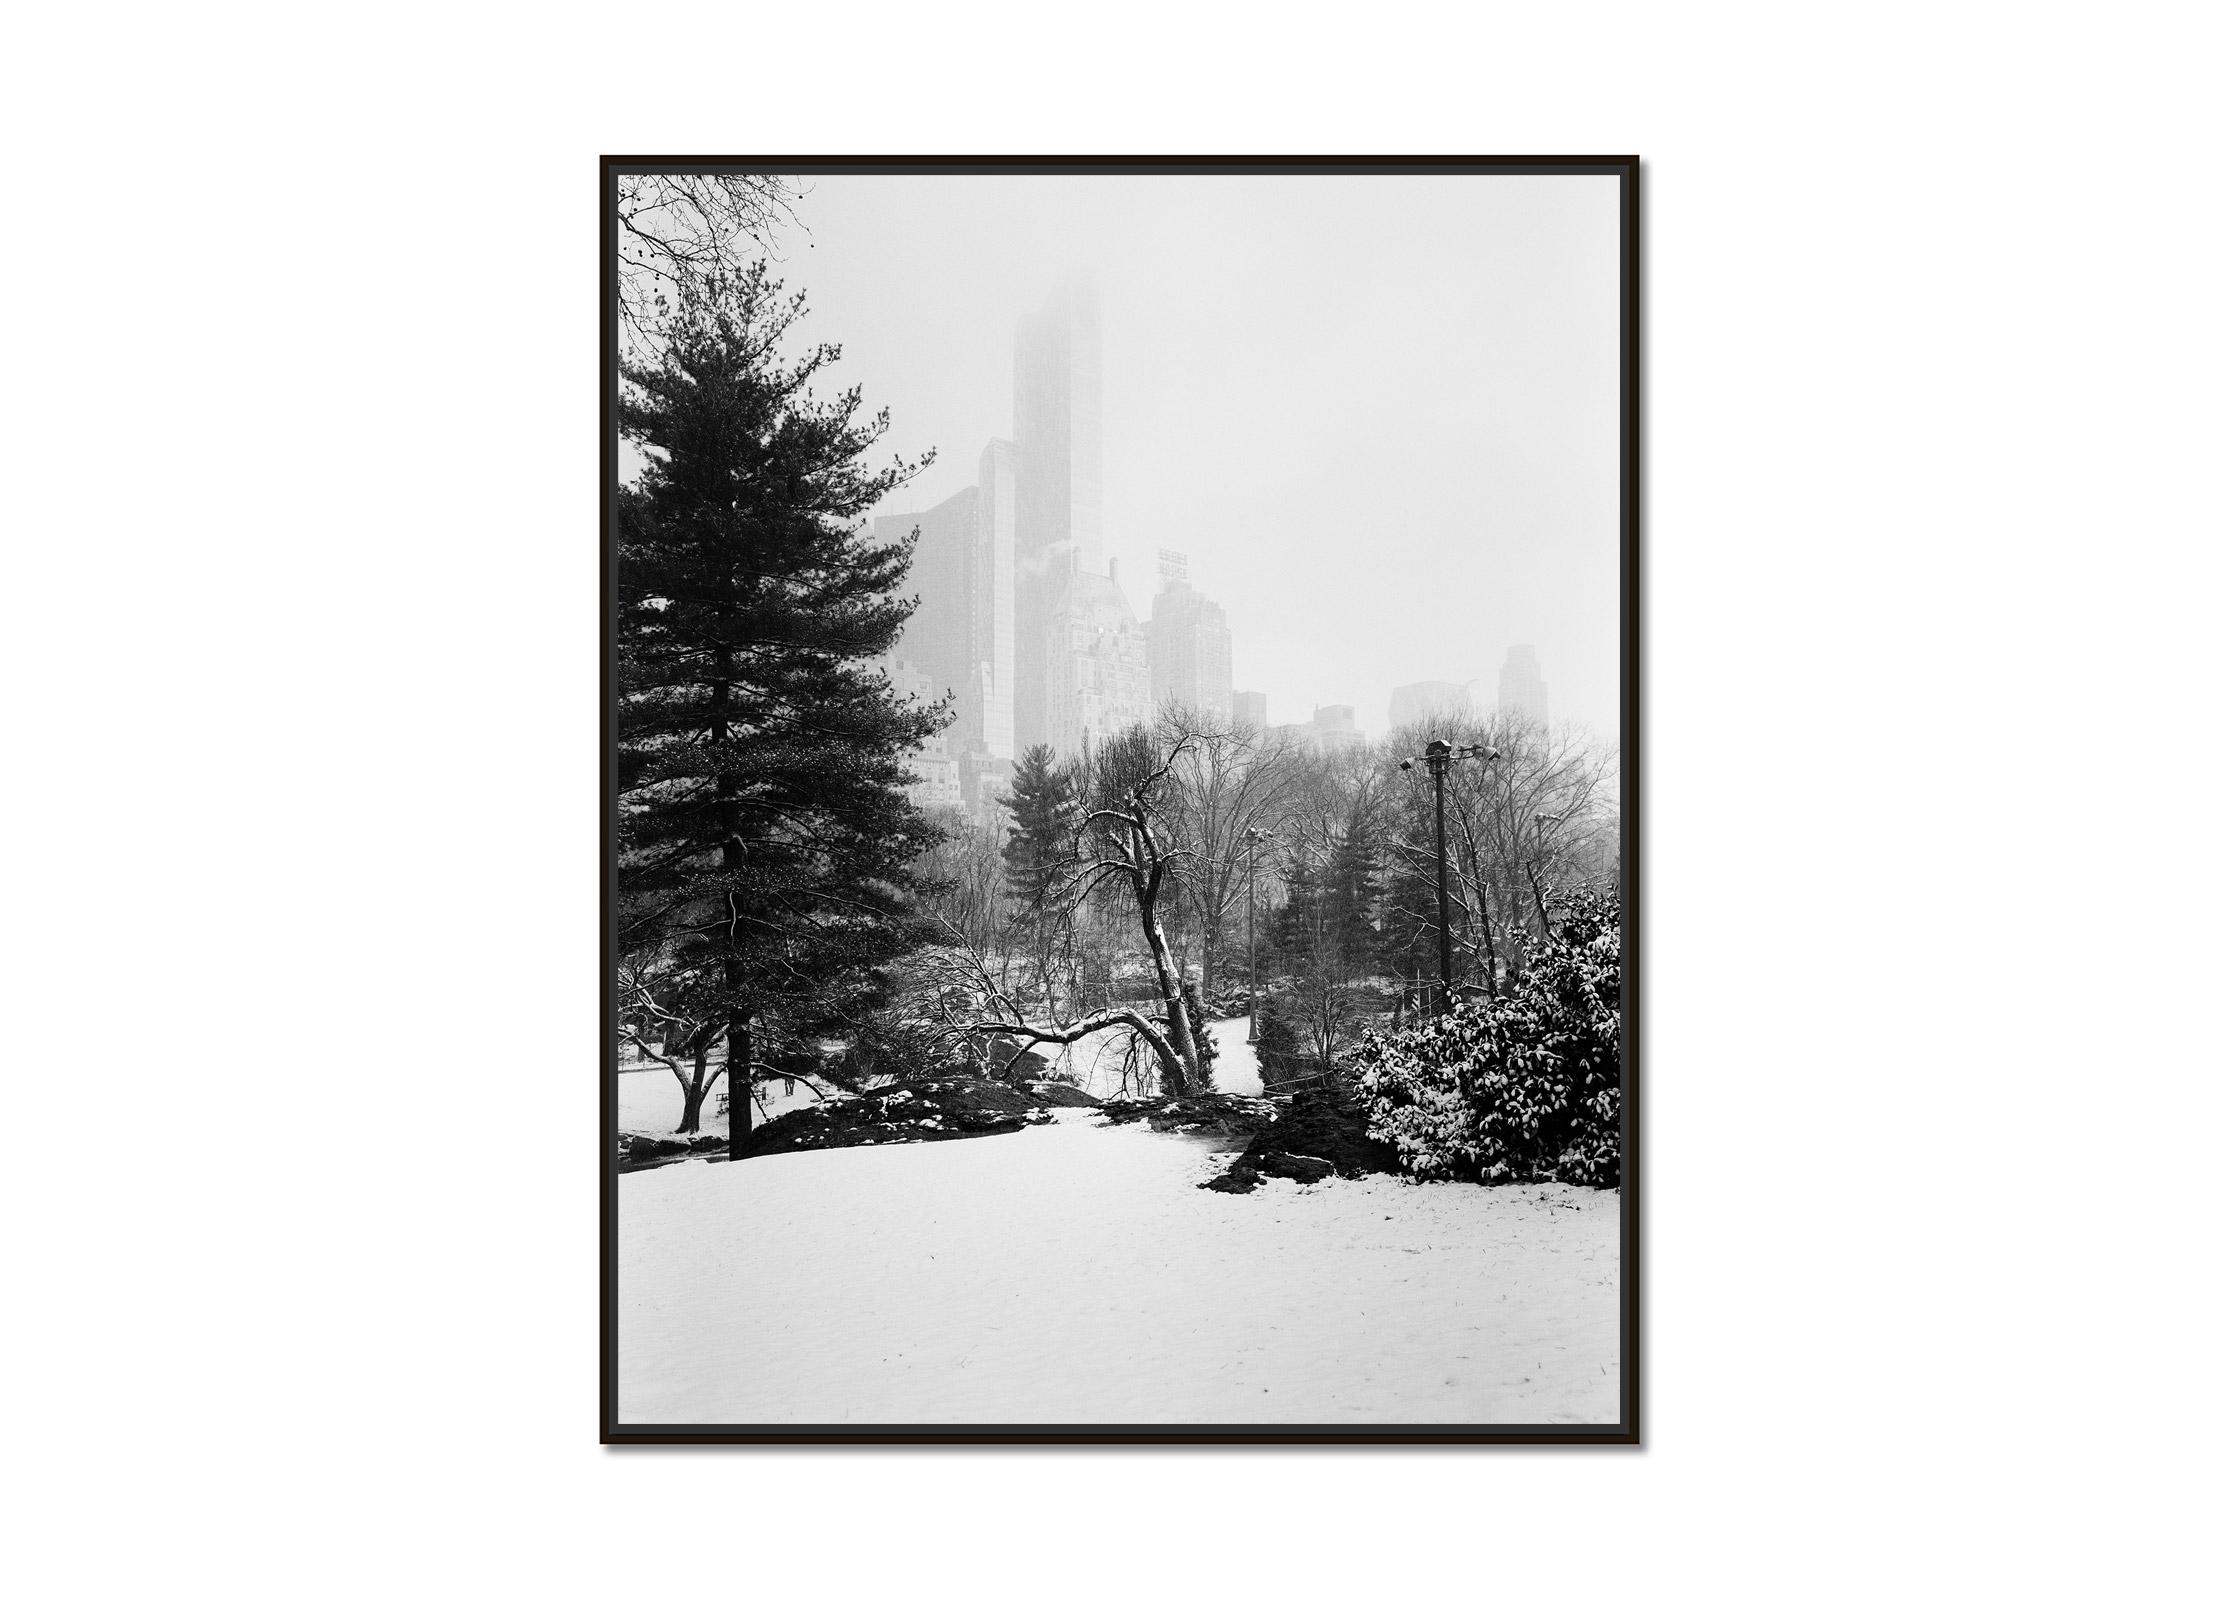 Snow Covered Central Park, New York, USA, black and white photography, landscape - Photograph by Gerald Berghammer